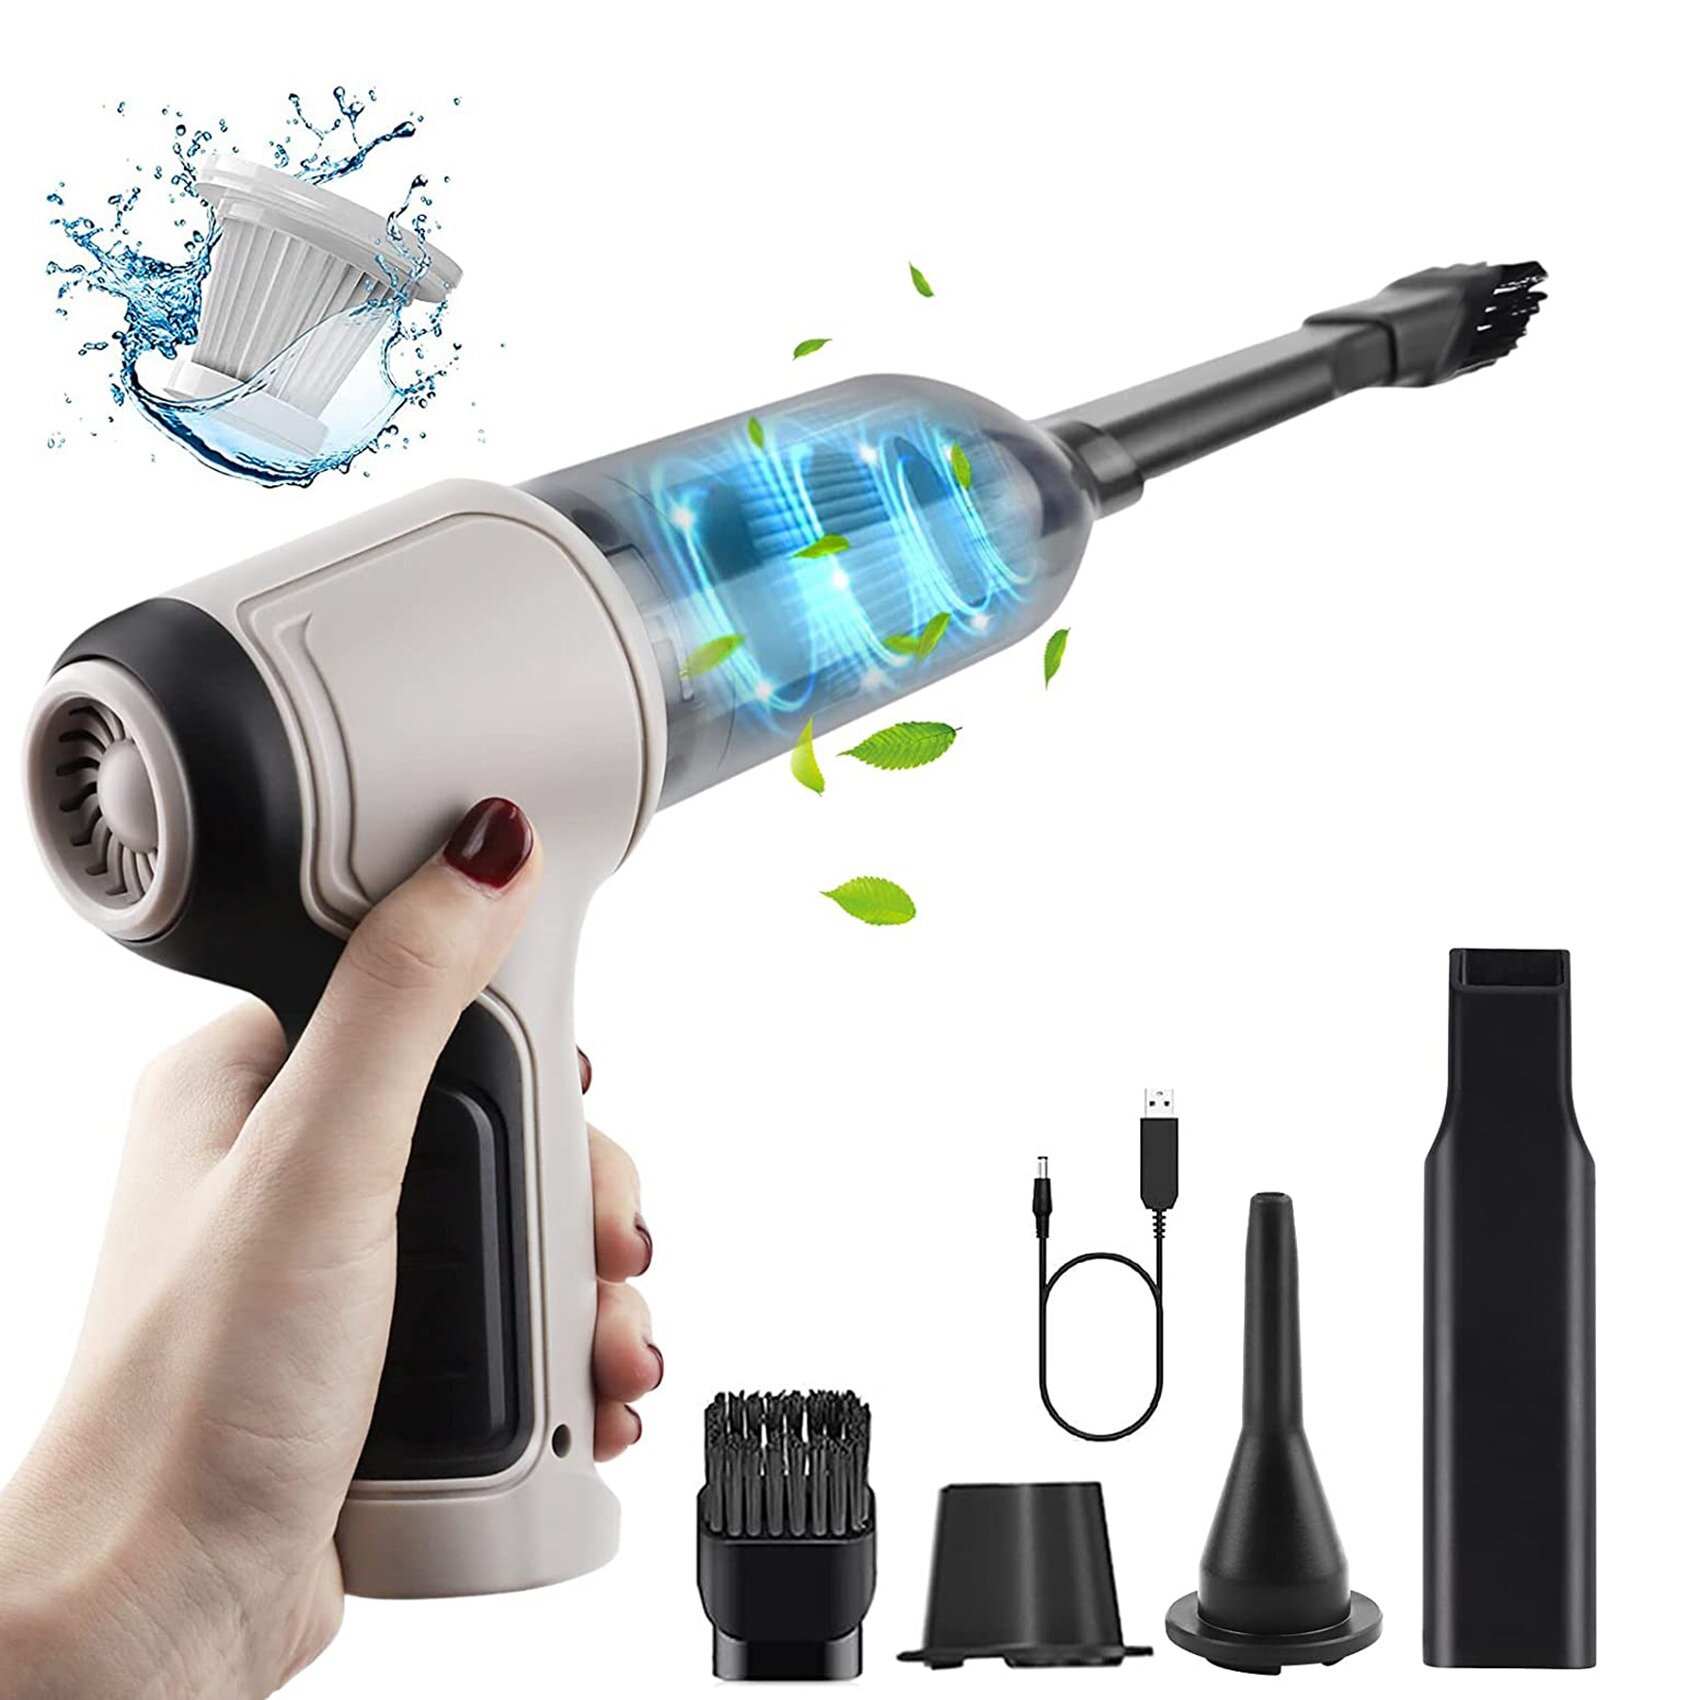 

3 In 1 9000Pa 120W Portable Car Vacuum Cleaner Cordless Handheld Mini Home Office Vaccum Cleaner USB Chargingw/ 2x2000